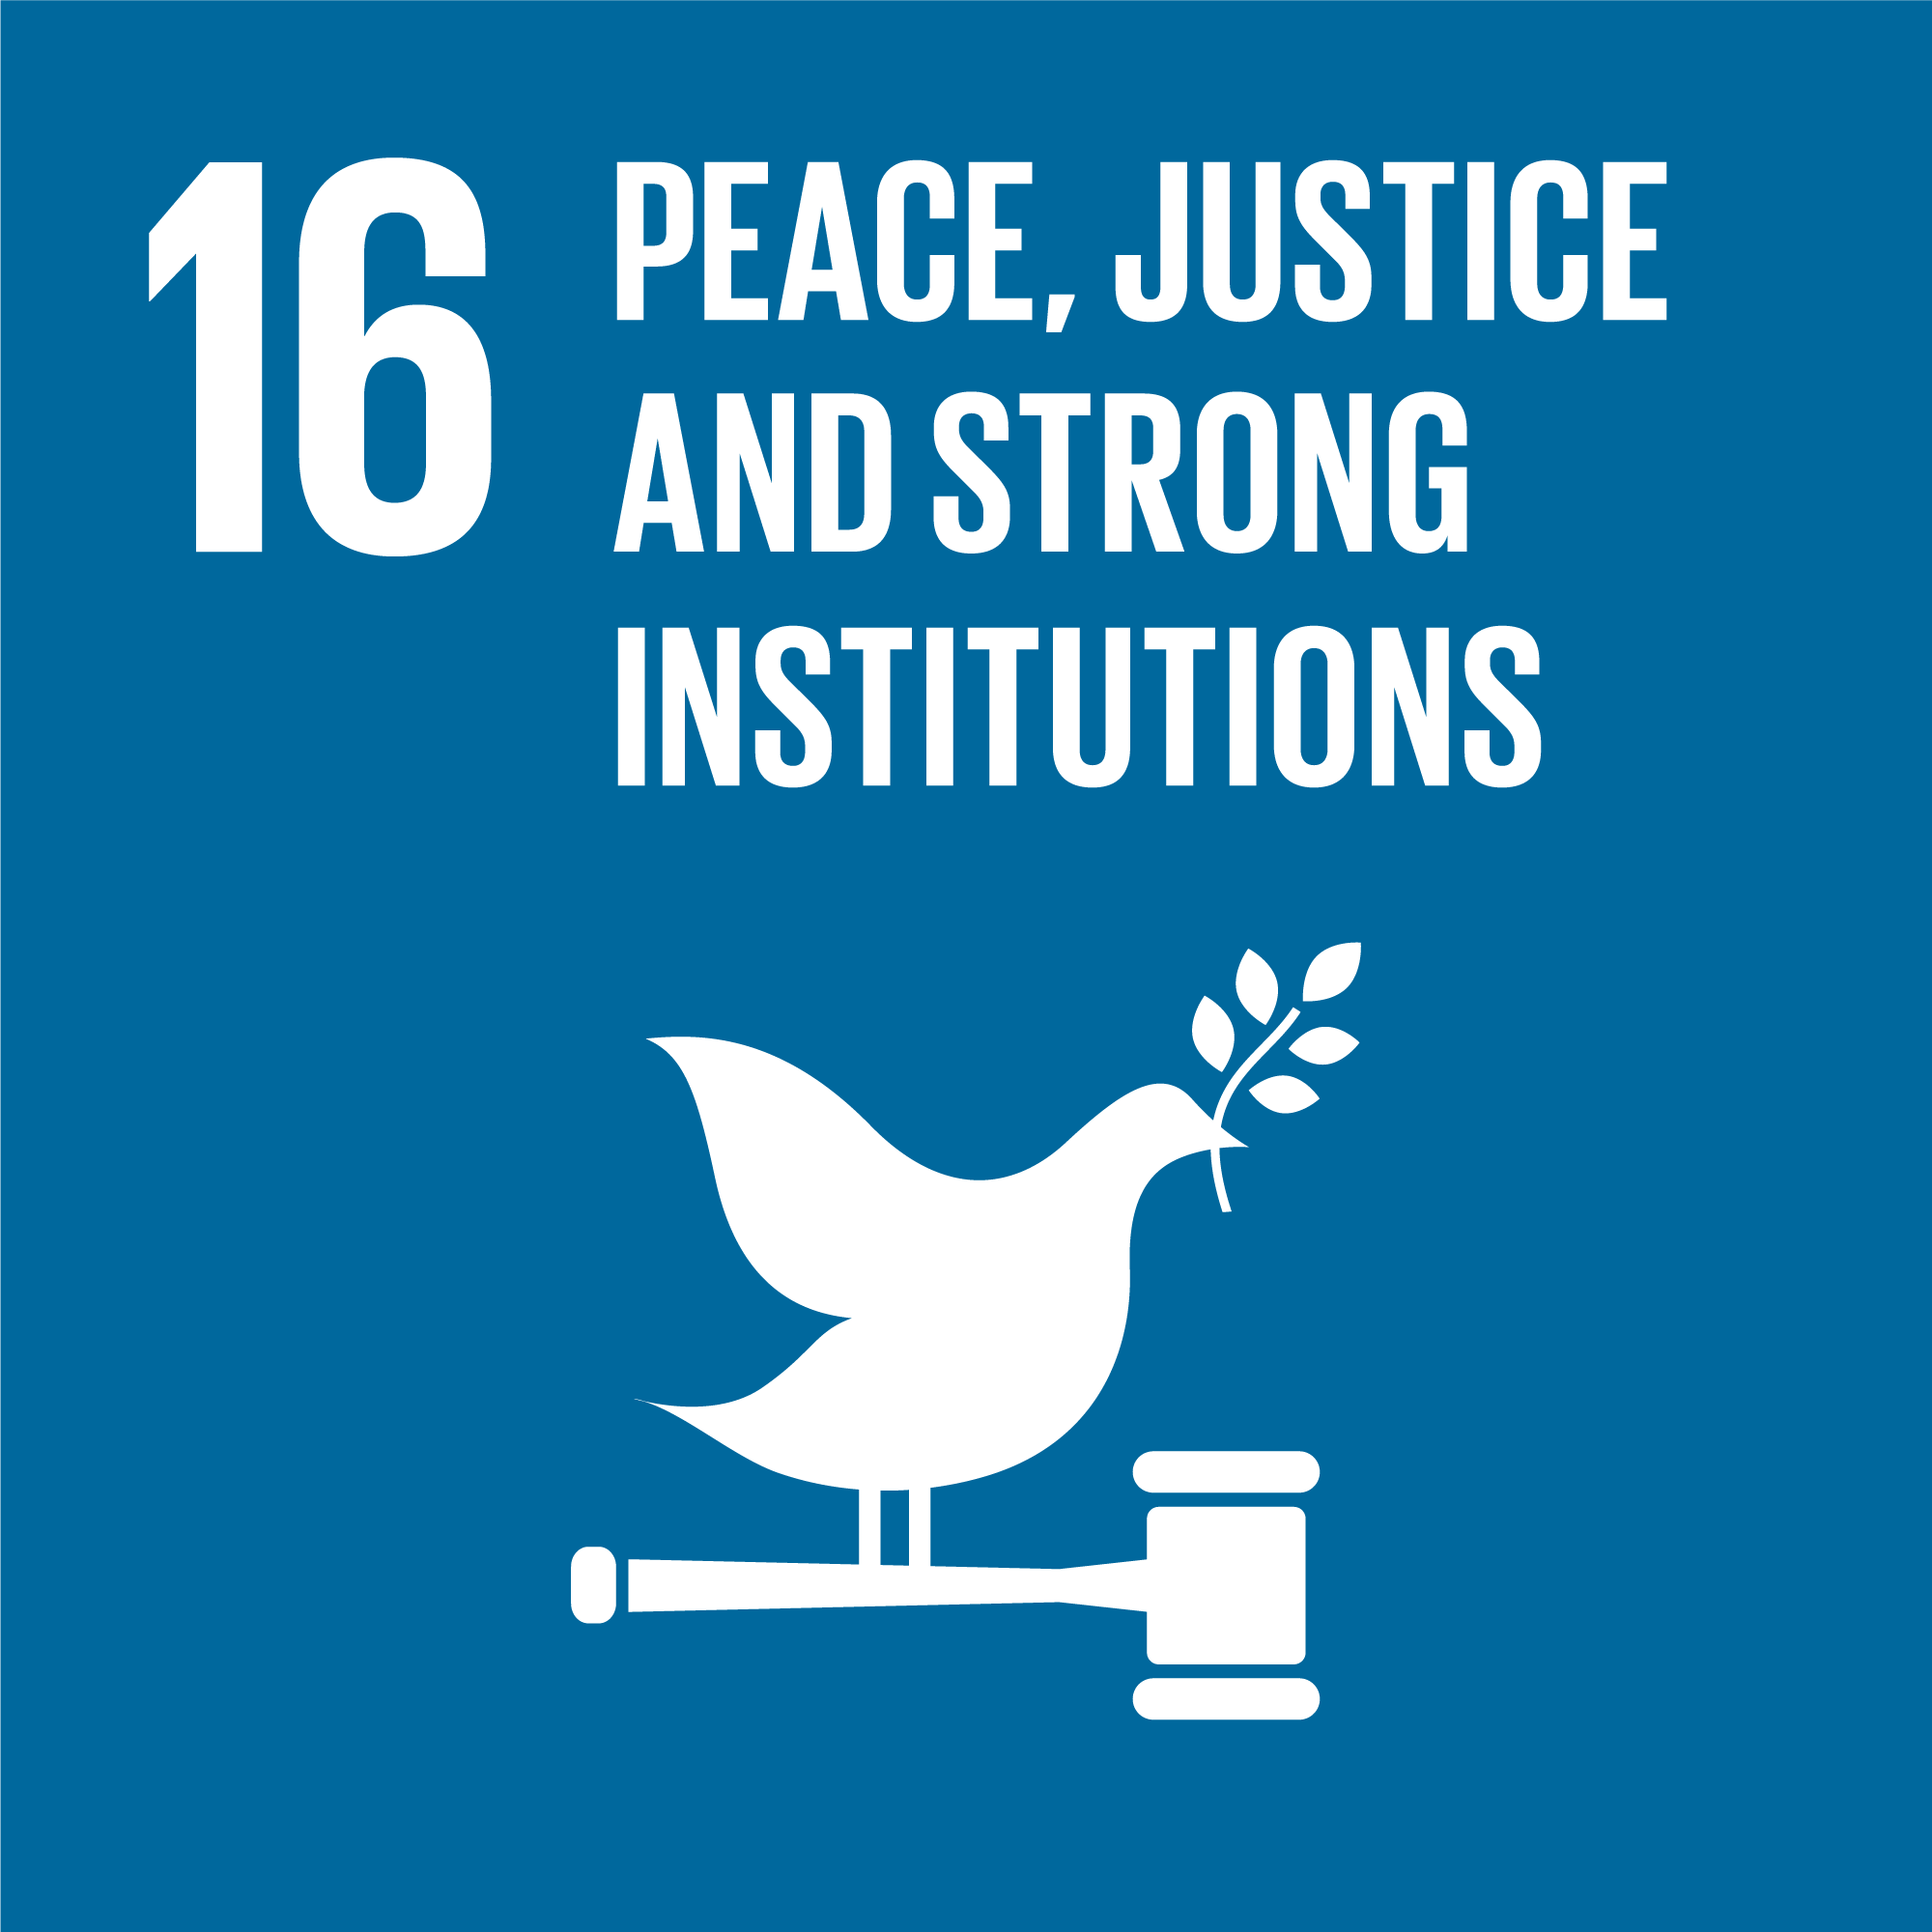 Sustainable Goal 16: Peace, Justice and Strong Institutions